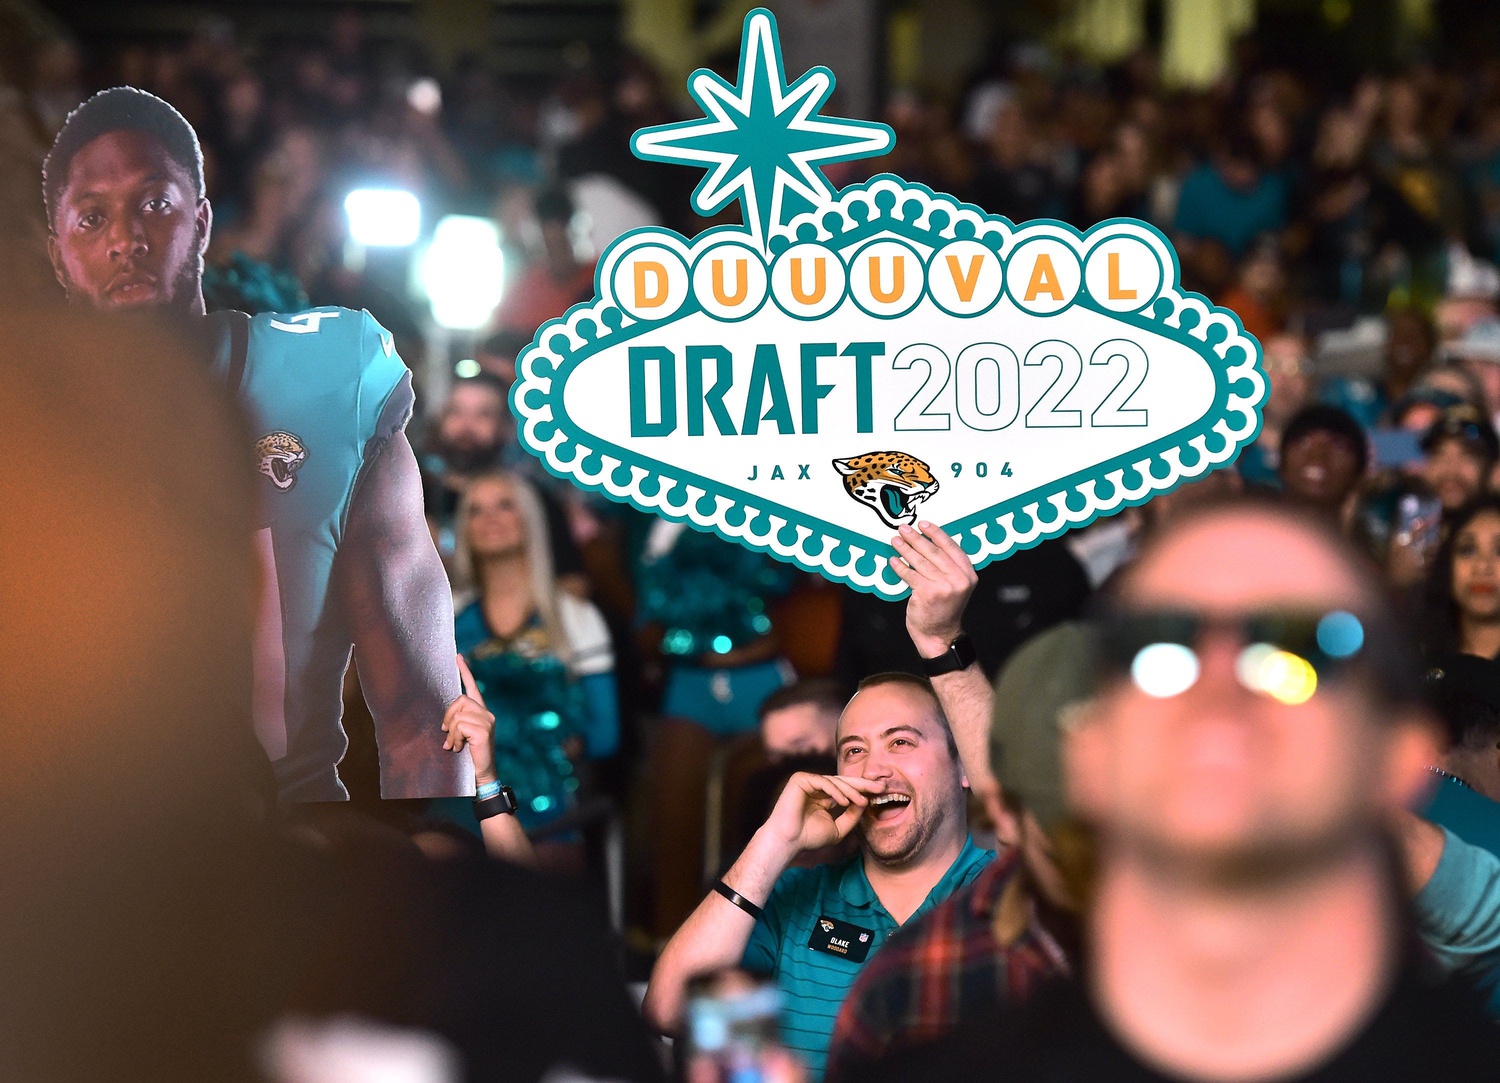 2022 Draft Analysis: Browns patch several needs but won't stop looking for  ways to improve